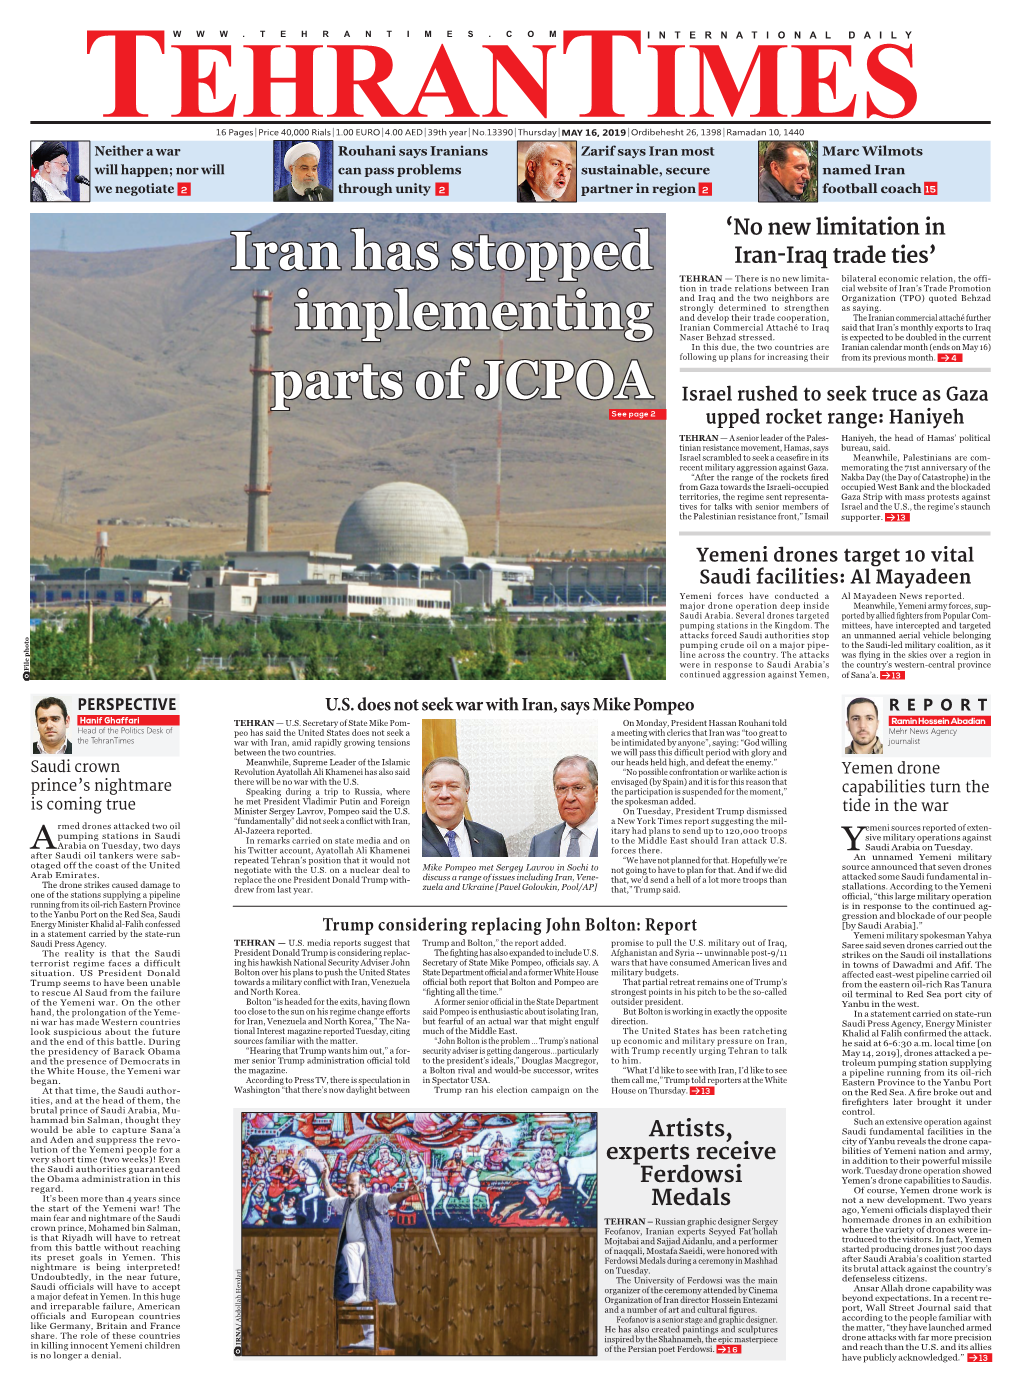 Iran Has Stopped Implementing Parts of JCPOA